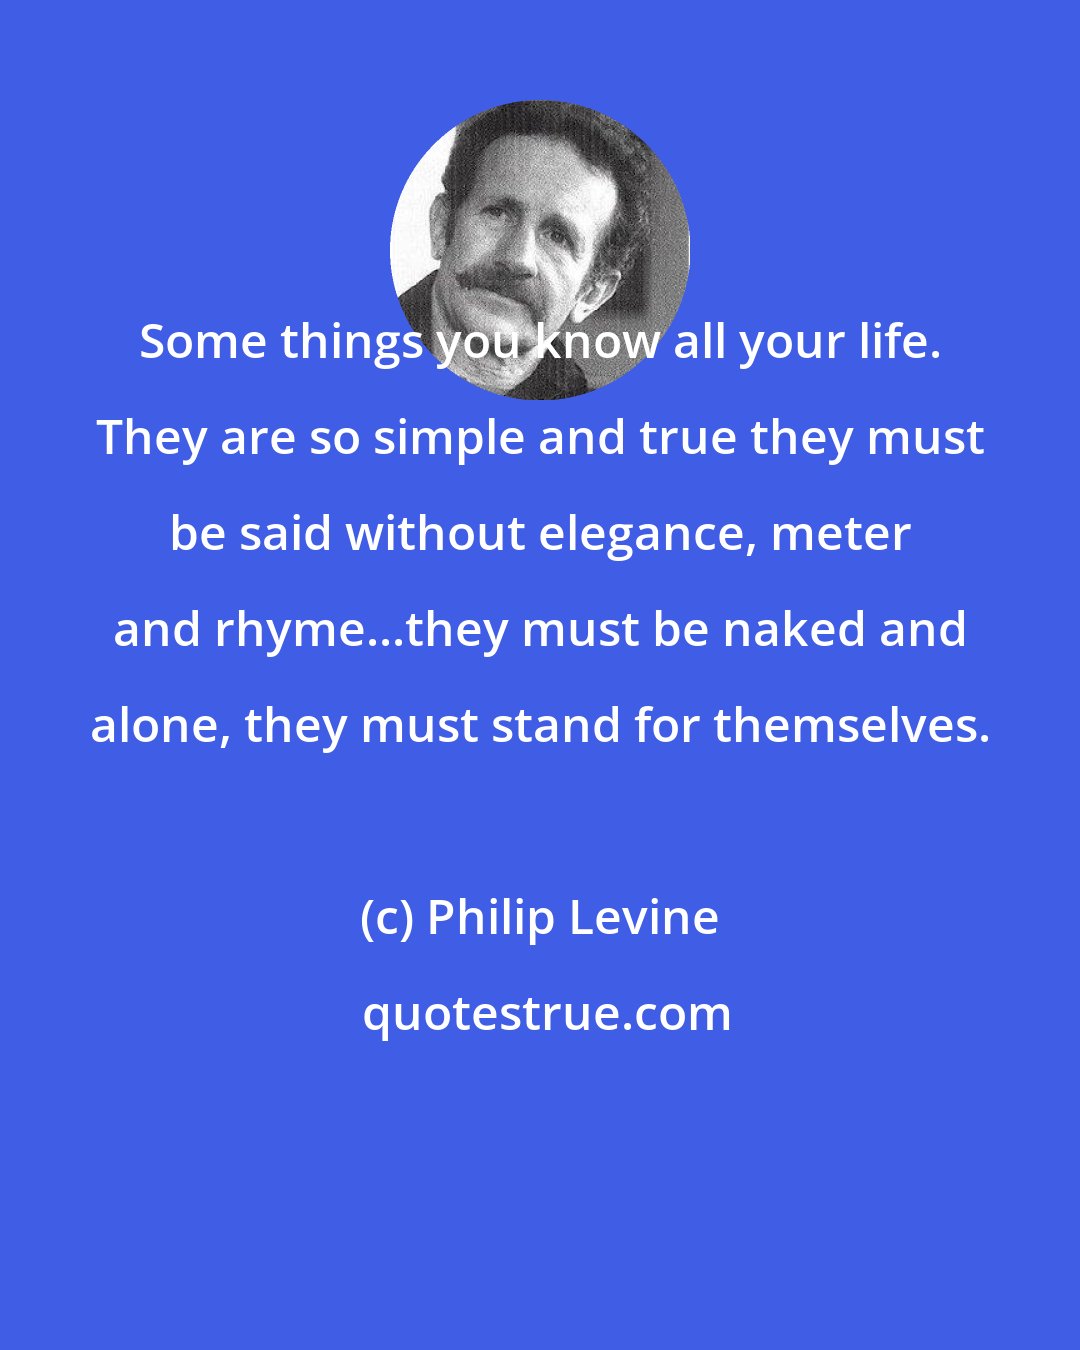 Philip Levine: Some things you know all your life. They are so simple and true they must be said without elegance, meter and rhyme...they must be naked and alone, they must stand for themselves.